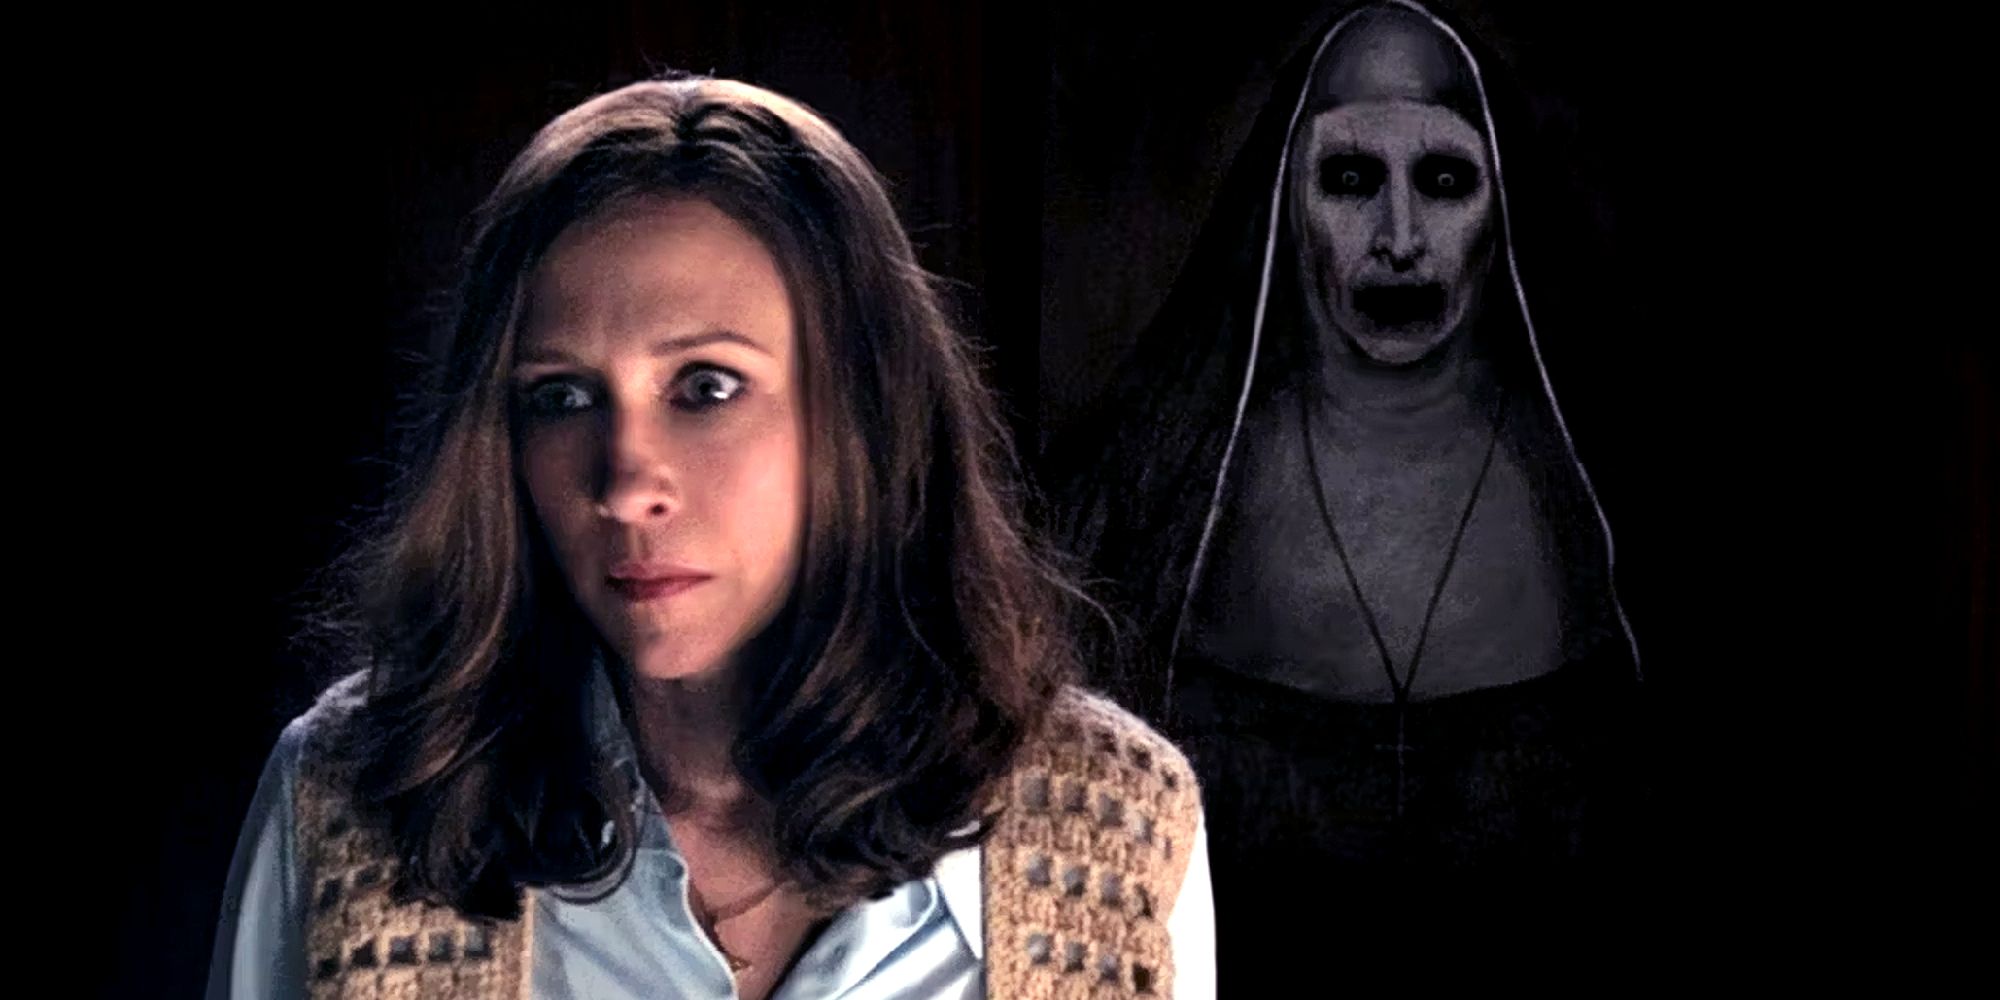 Lorraine Warren and The Nun Painting Scene in The Conjuring 2